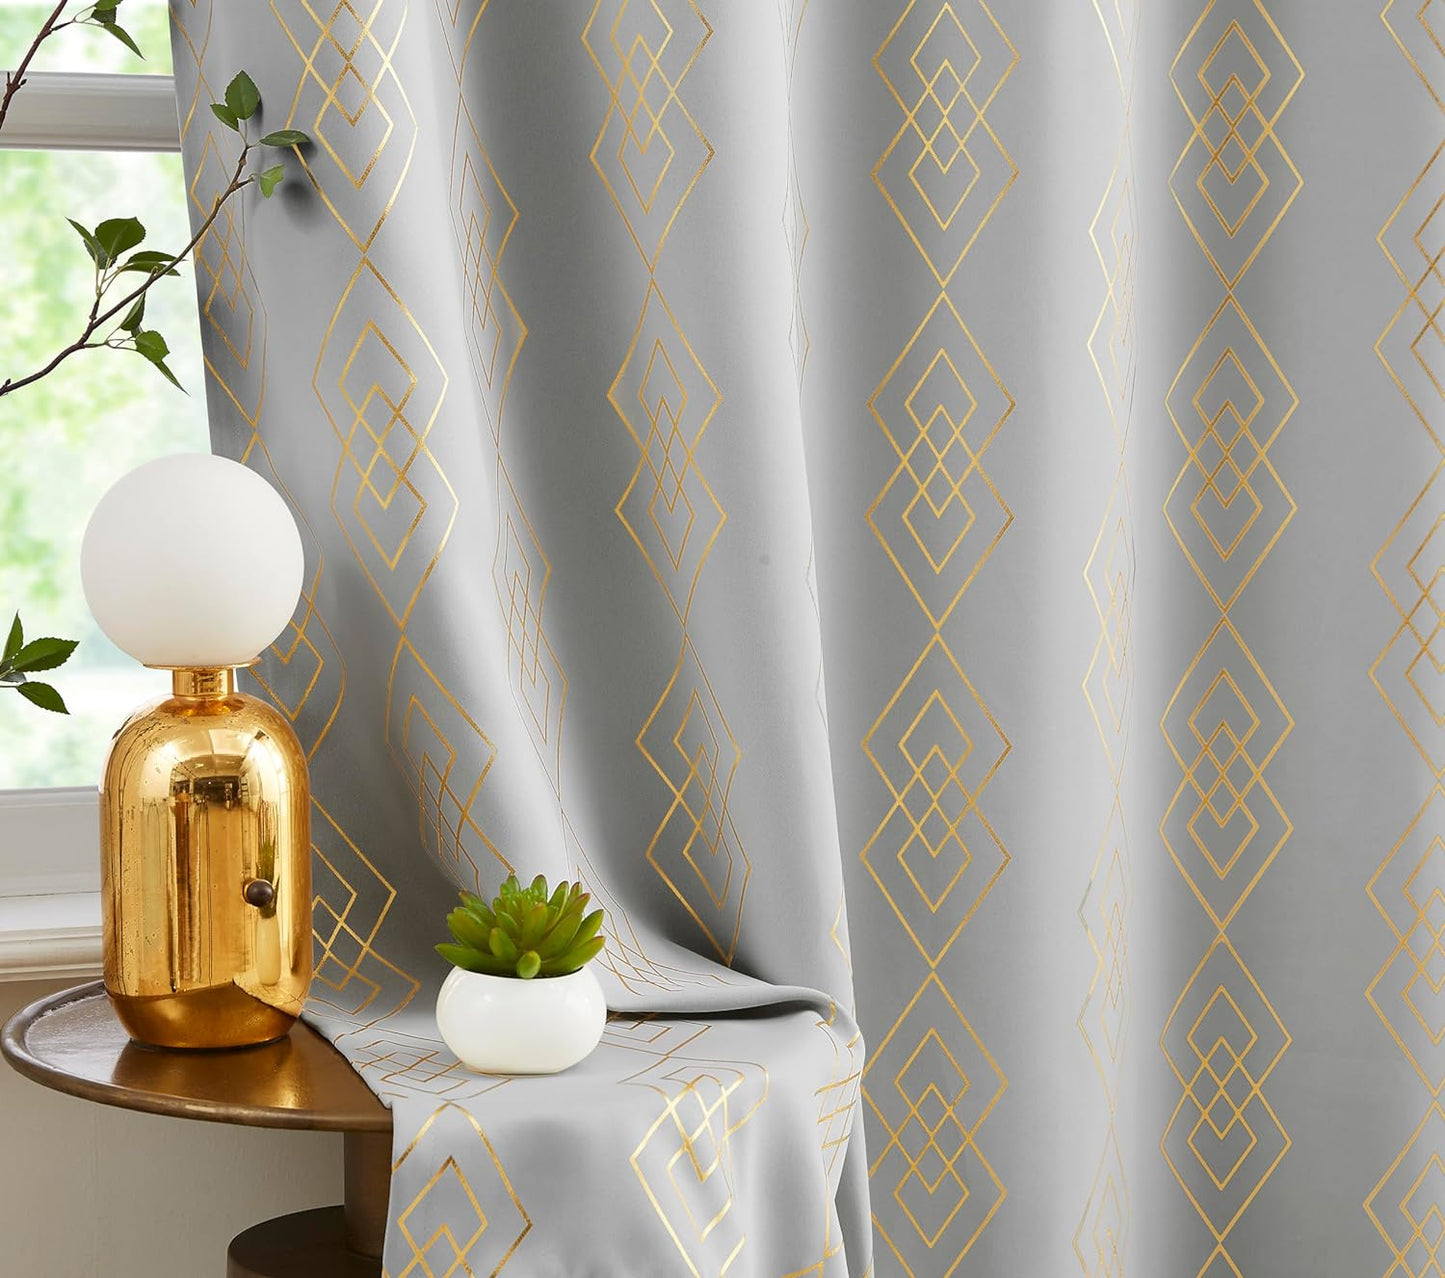 Metallic Geo Blackout Curtain Panels for Bedroom Thermal Insulated Light Blocking Foil Trellis Moroccan Window Treatments Diamond Grommet Drapes for Living-Room, Set of 2, 50" X 84", Beige/Gold  ugoutry Geometric Grey 50"X96"X2 